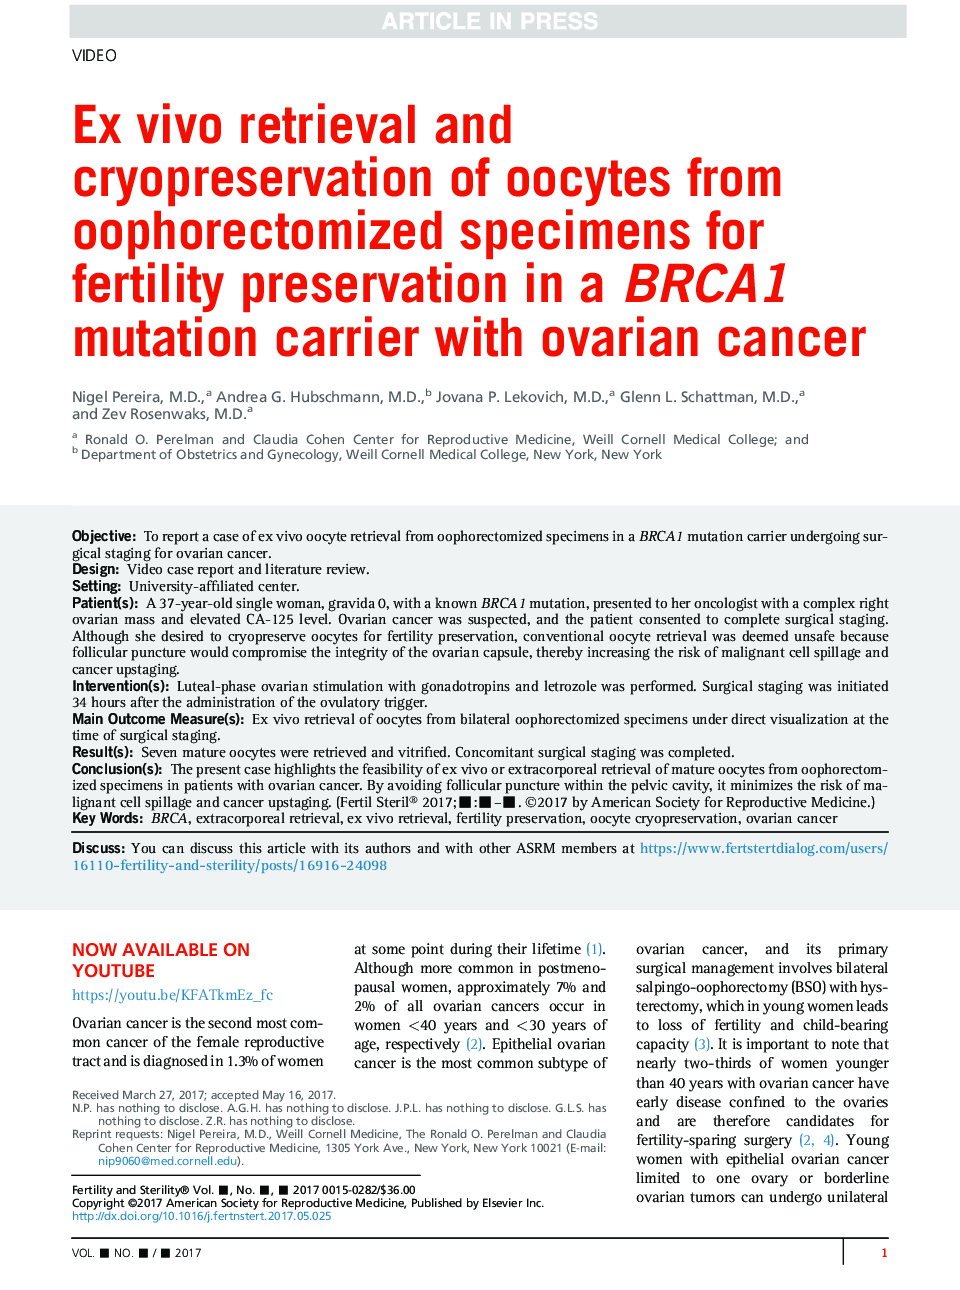 ExÂ vivo retrieval and cryopreservation of oocytes from oophorectomized specimens for fertility preservation in a BRCA1 mutation carrier with ovarian cancer